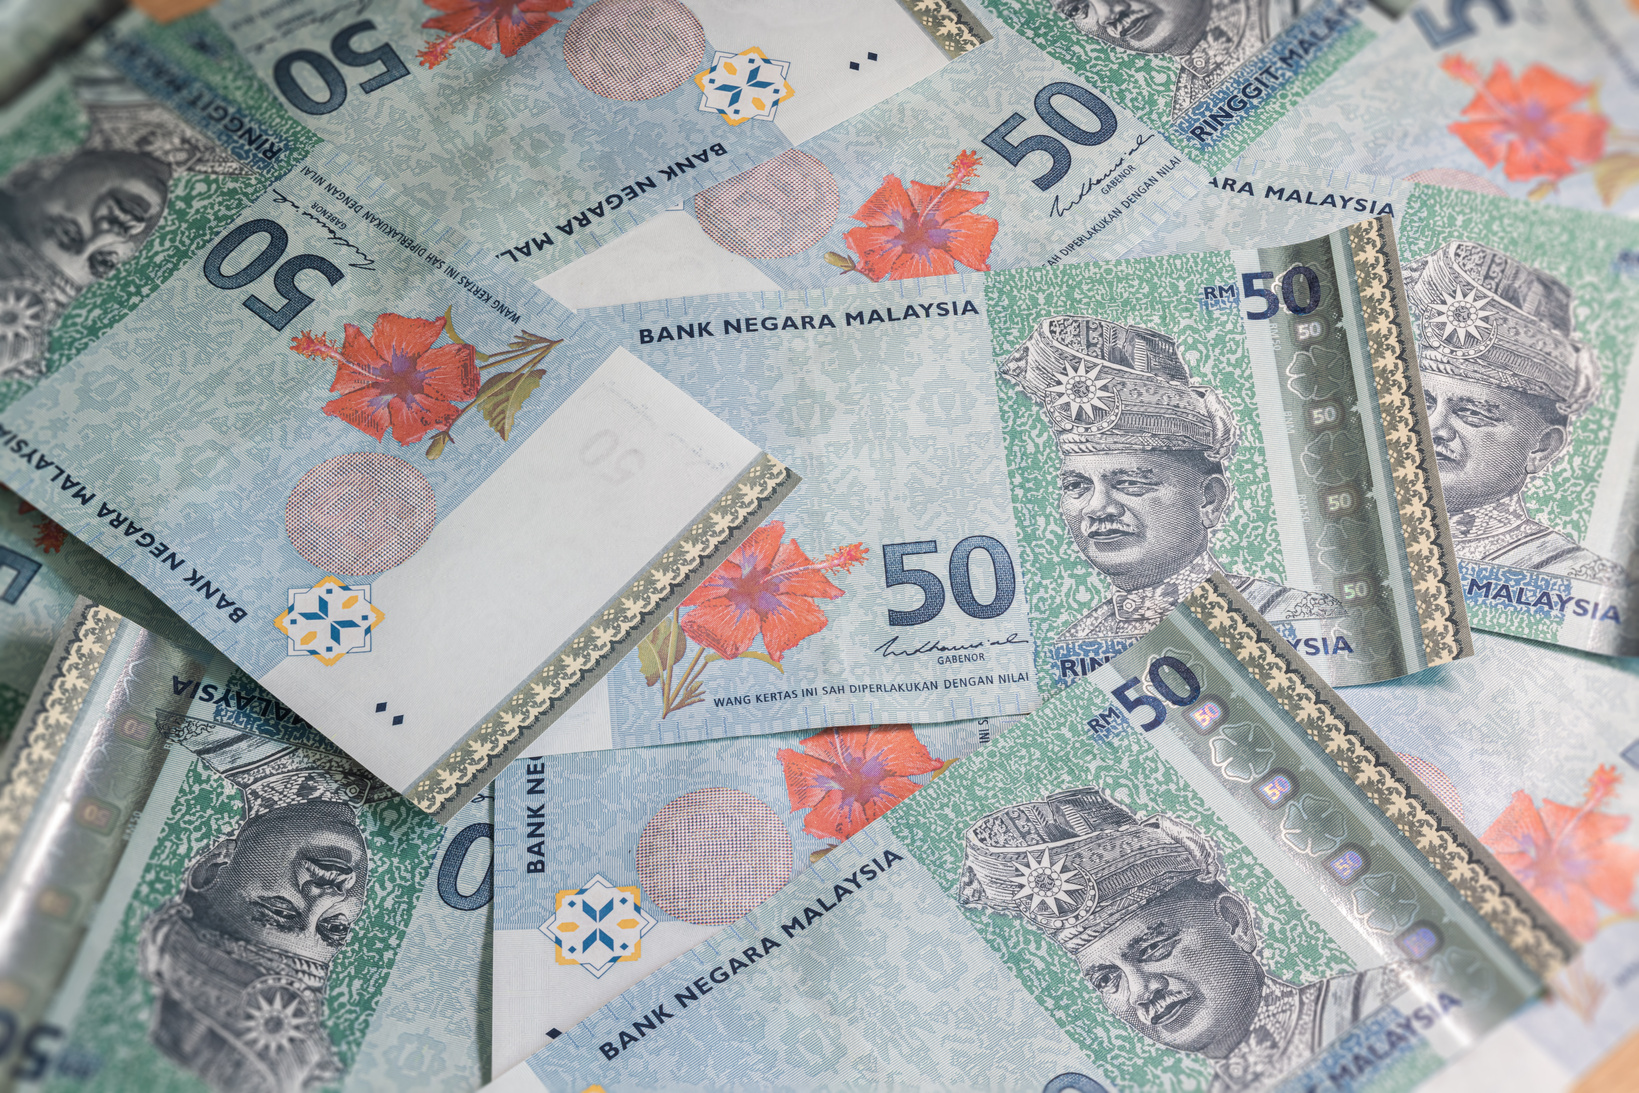 Detailed macro capture of brand new RM 50 with sequential number